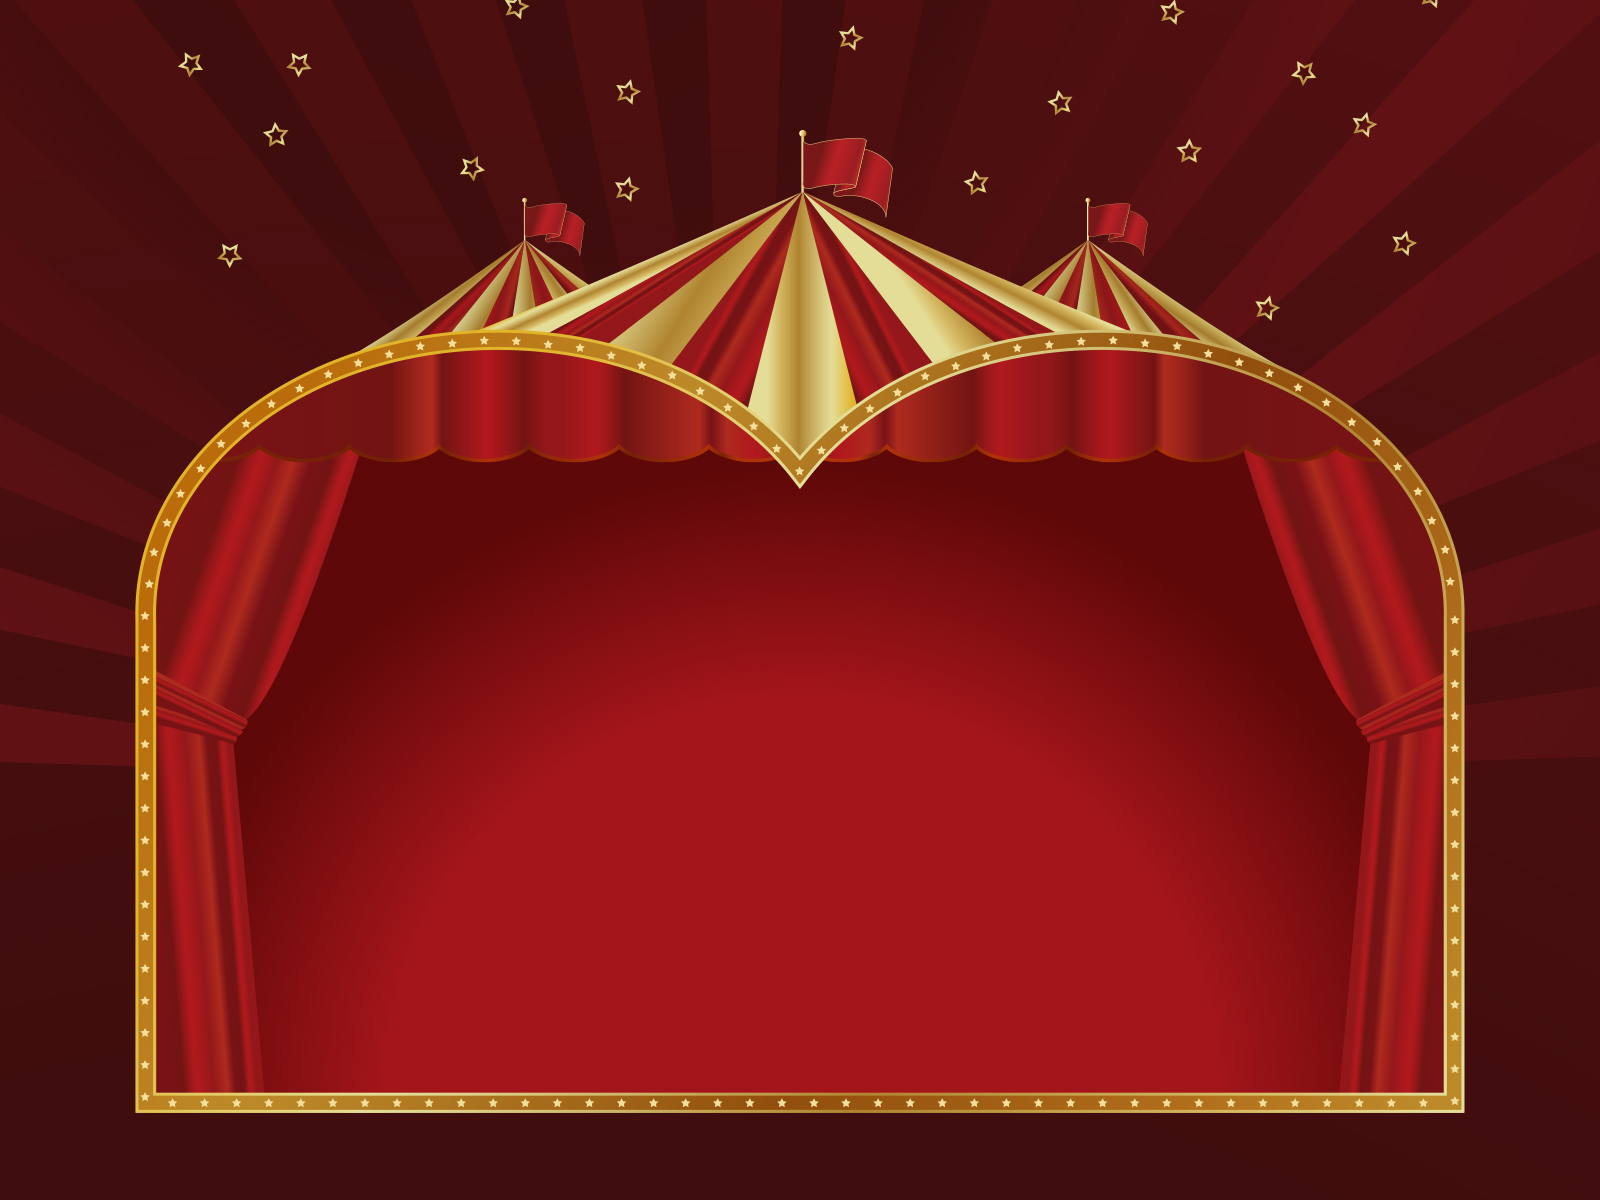 Carnival Background   PowerPoint Backgrounds for Free PowerPoint